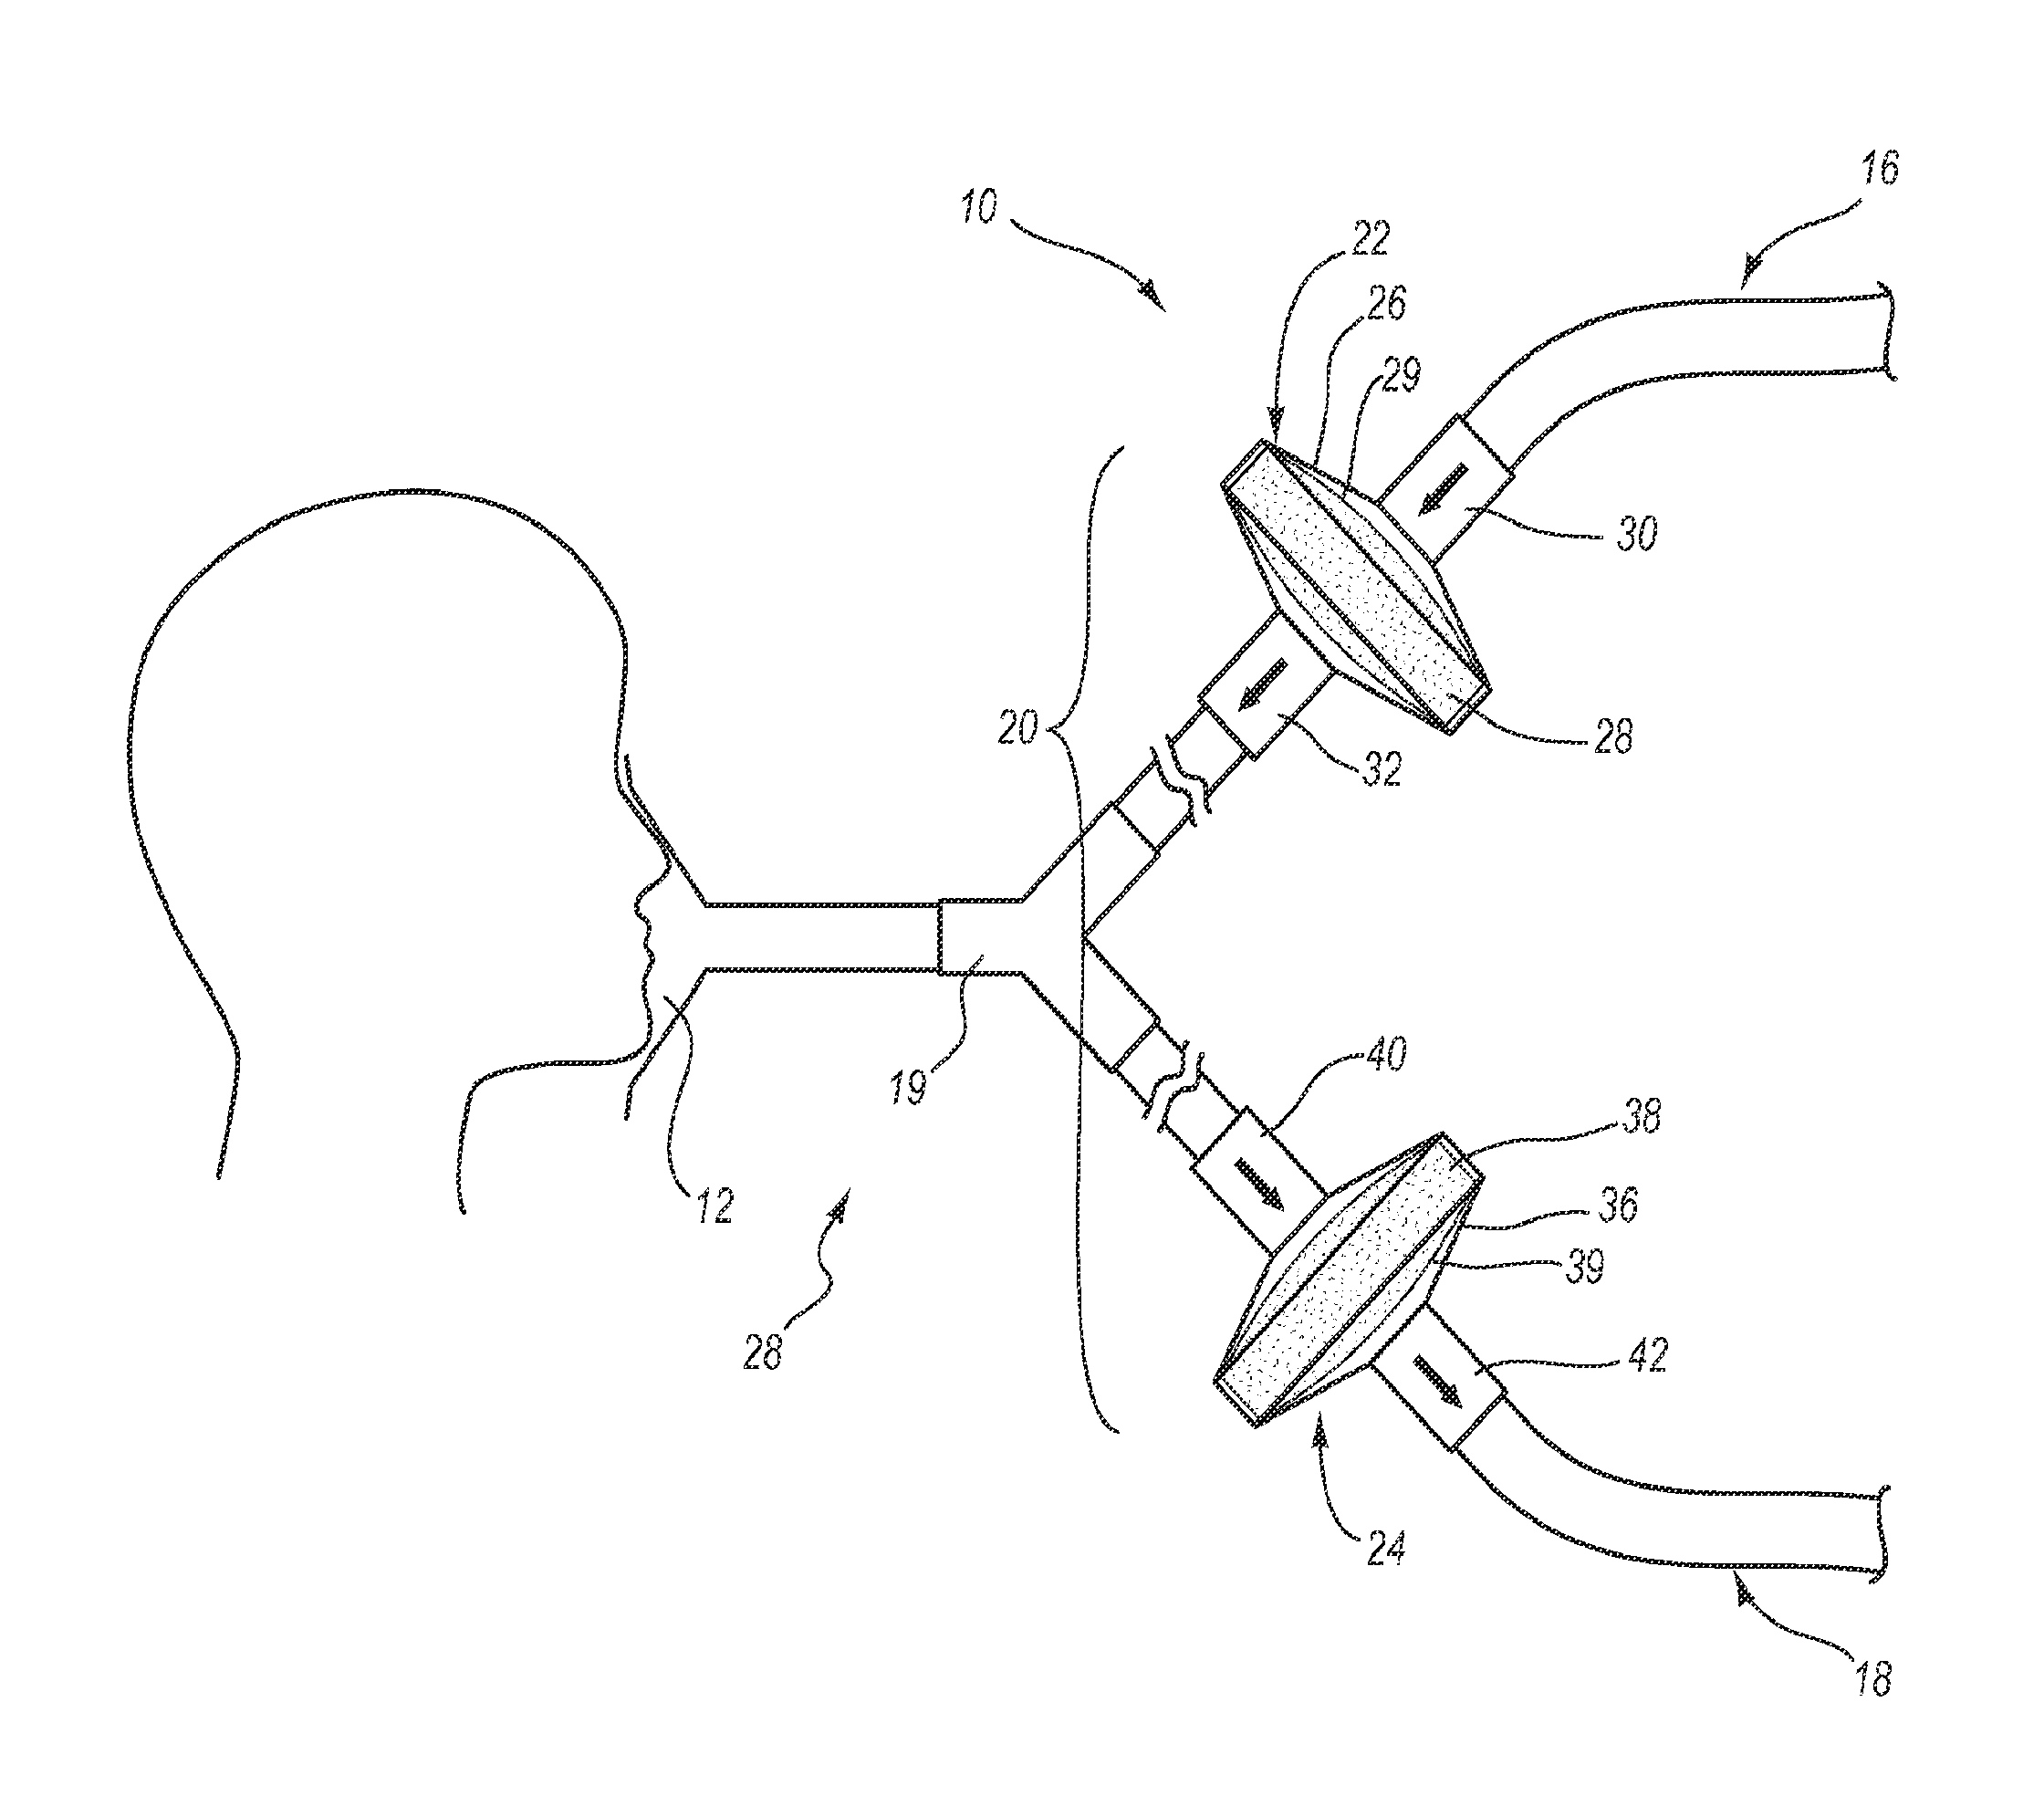 System, Method and Apparatus for Removal of Volatile Anesthetics for Malignant Hyperthermia